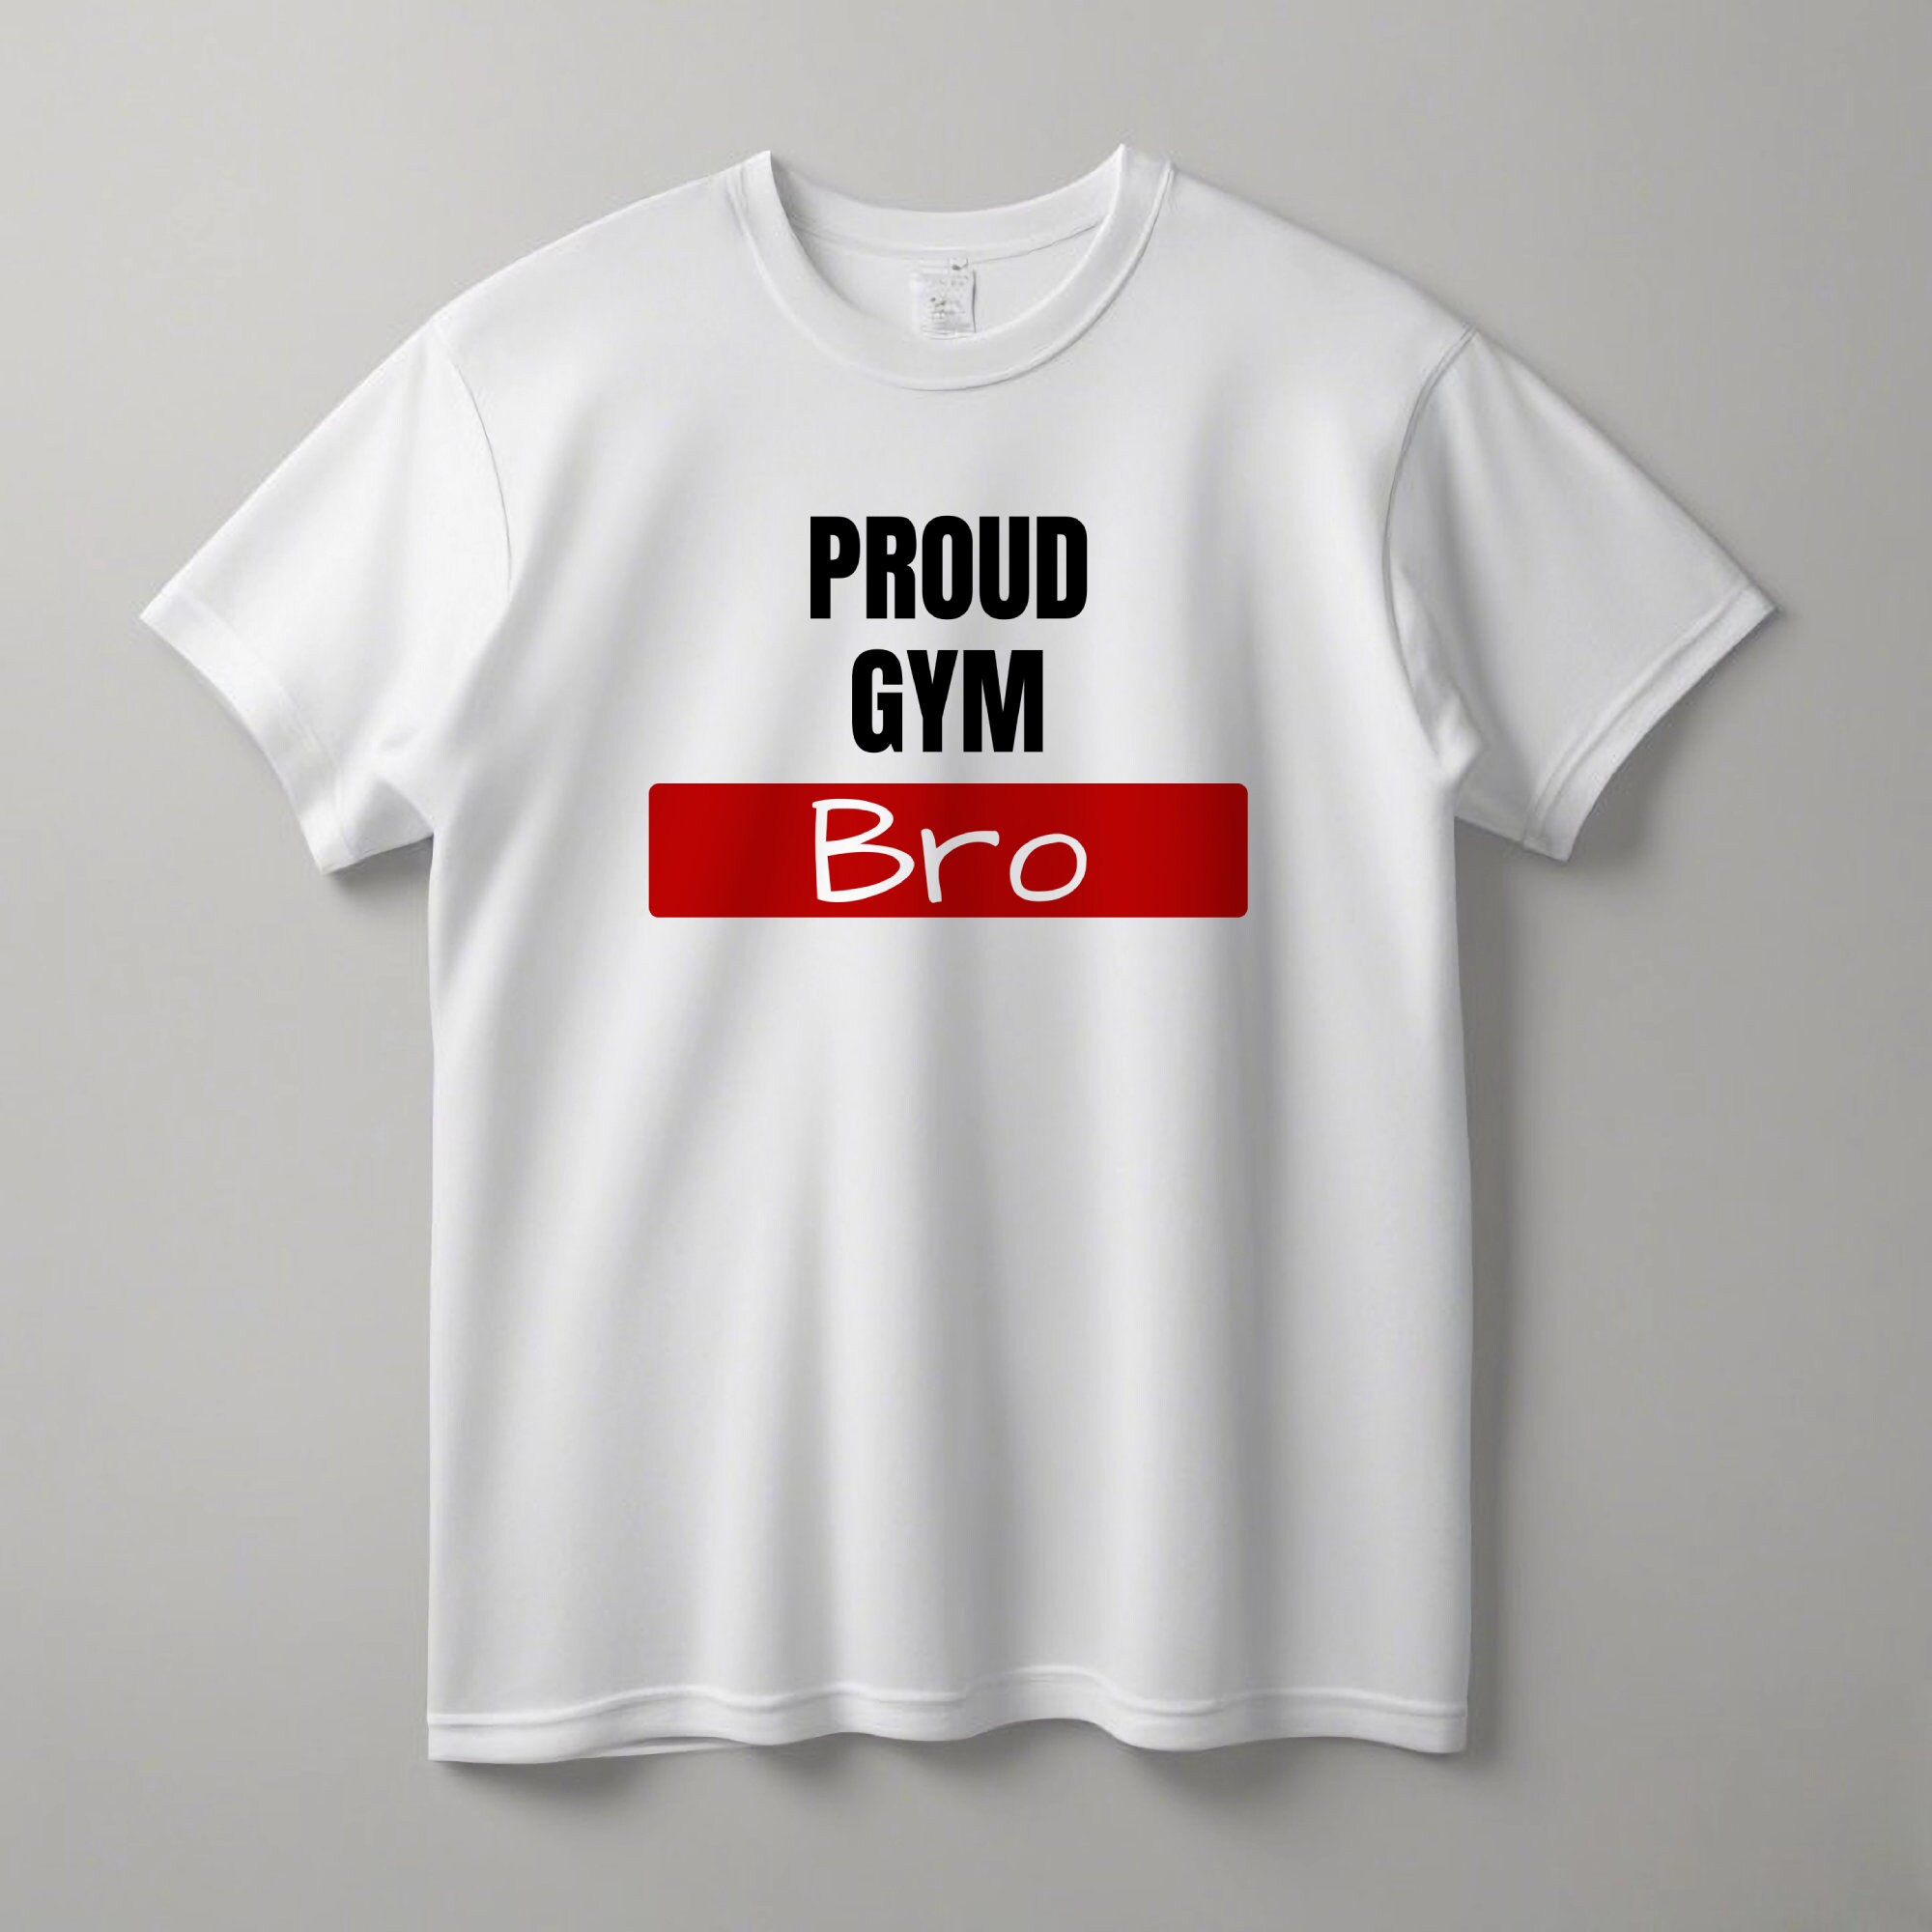 Gym Bro Gifts & Merchandise for Sale